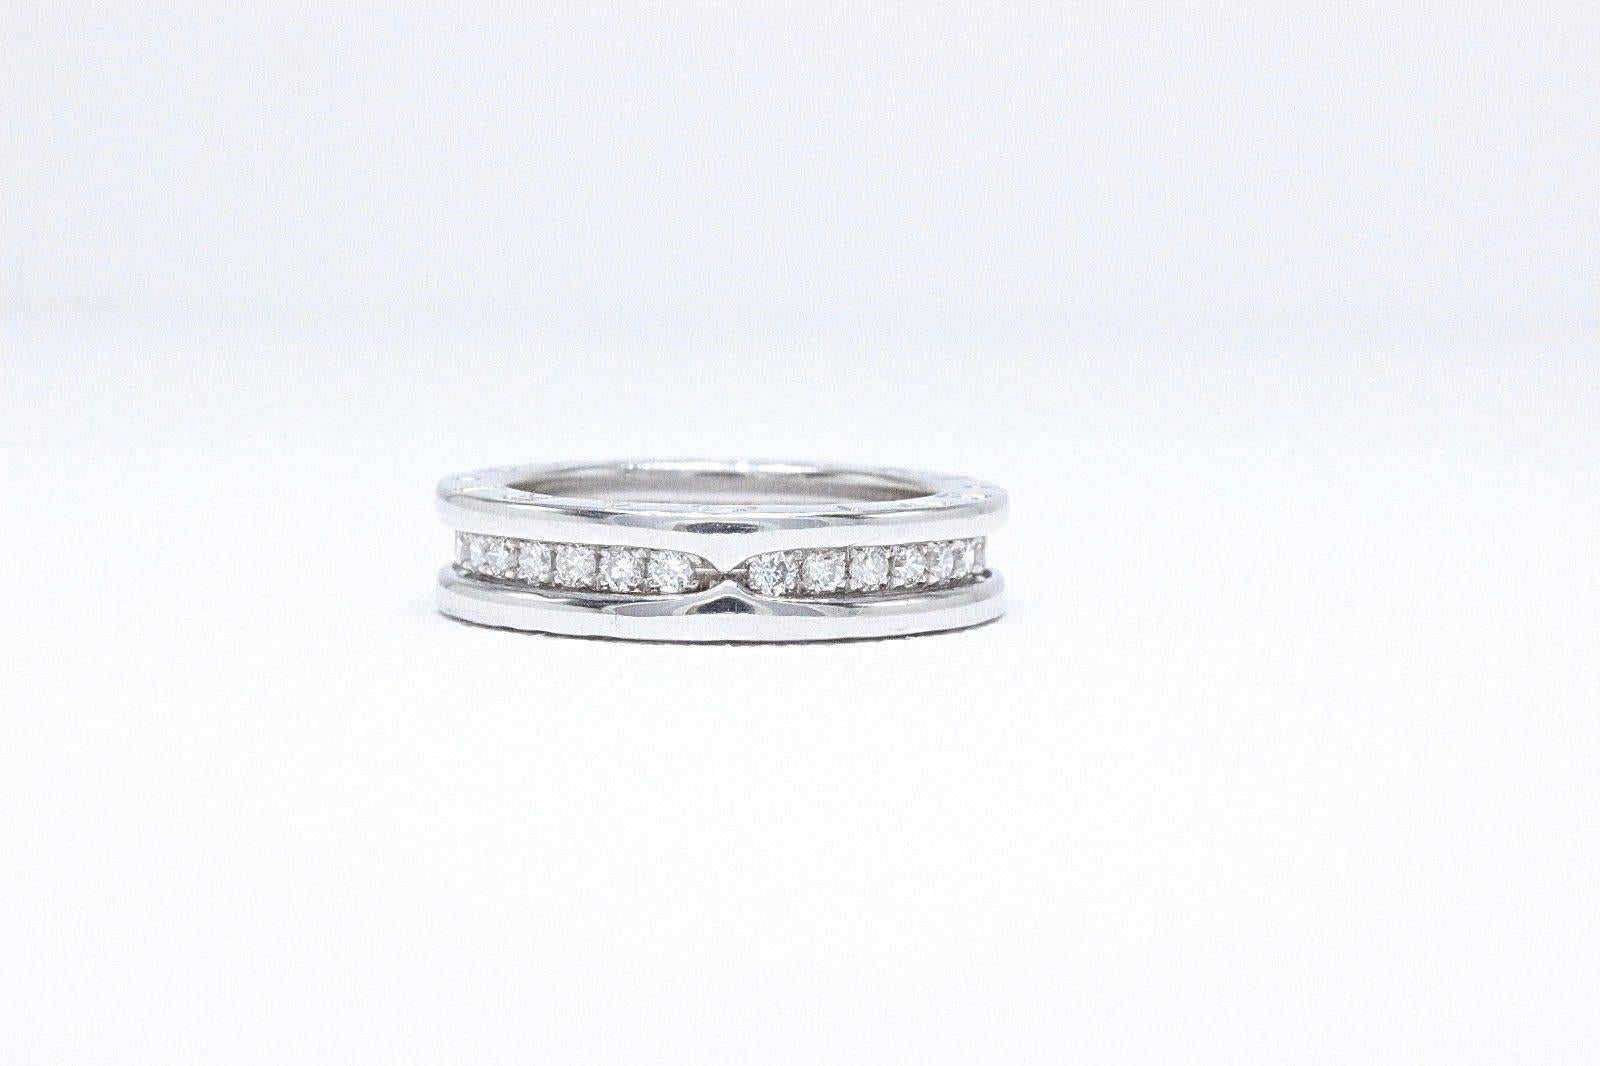 Bvlgari B.Zero One Row Diamond Band Ring in 18 Karat White Gold 0.60 Carat In Excellent Condition For Sale In San Diego, CA